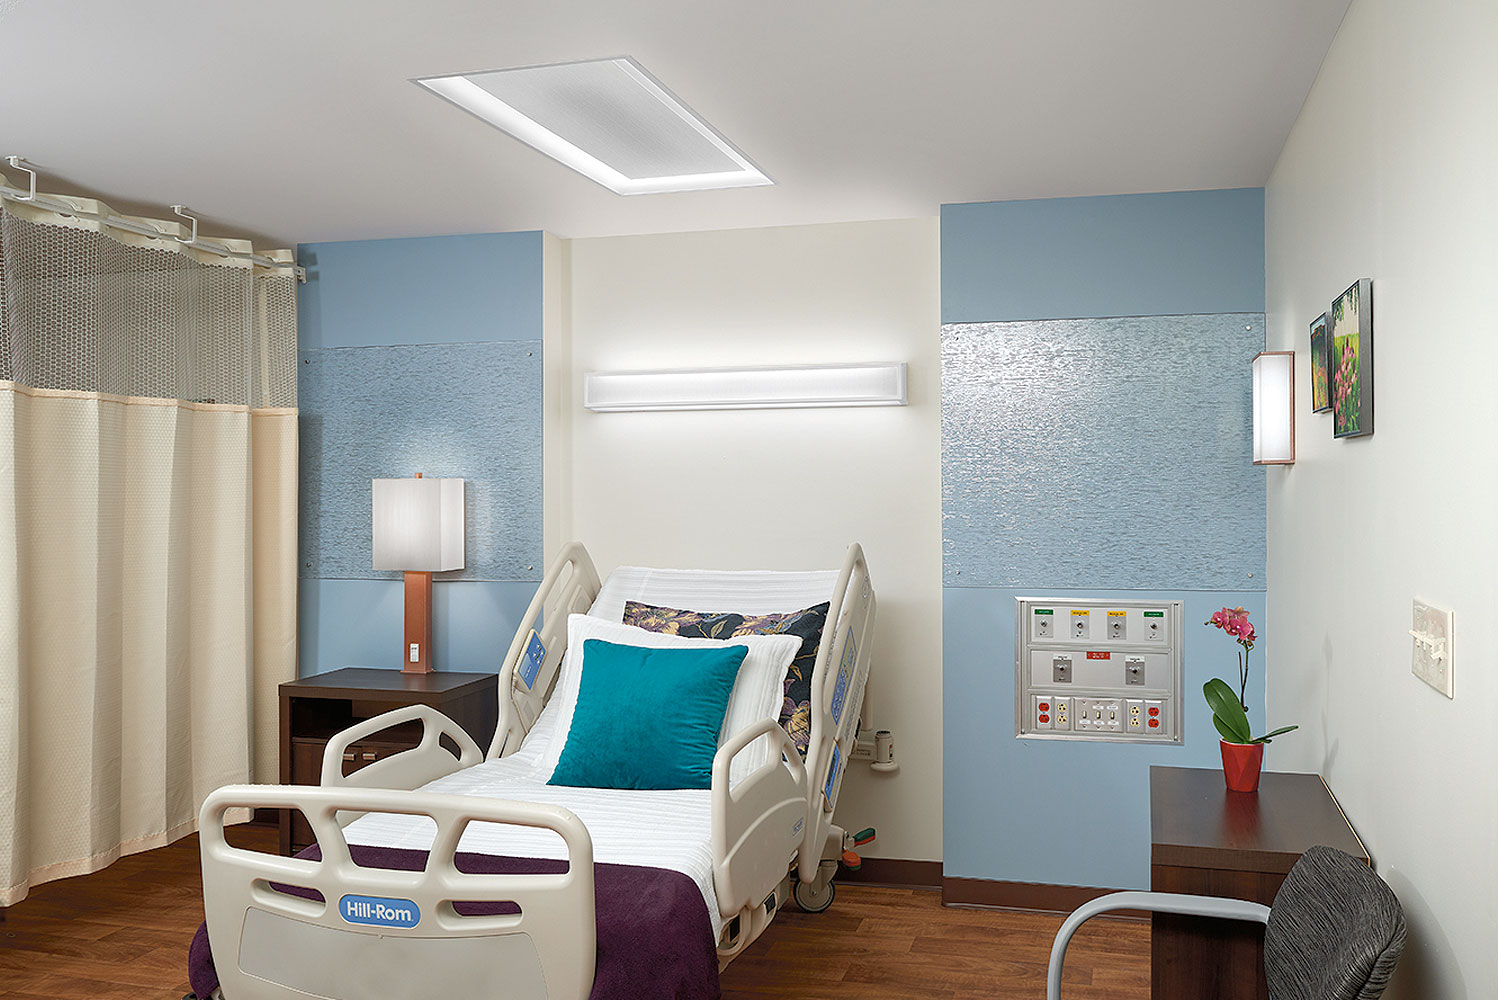 Serenity Overbed Light Above Patient Bed